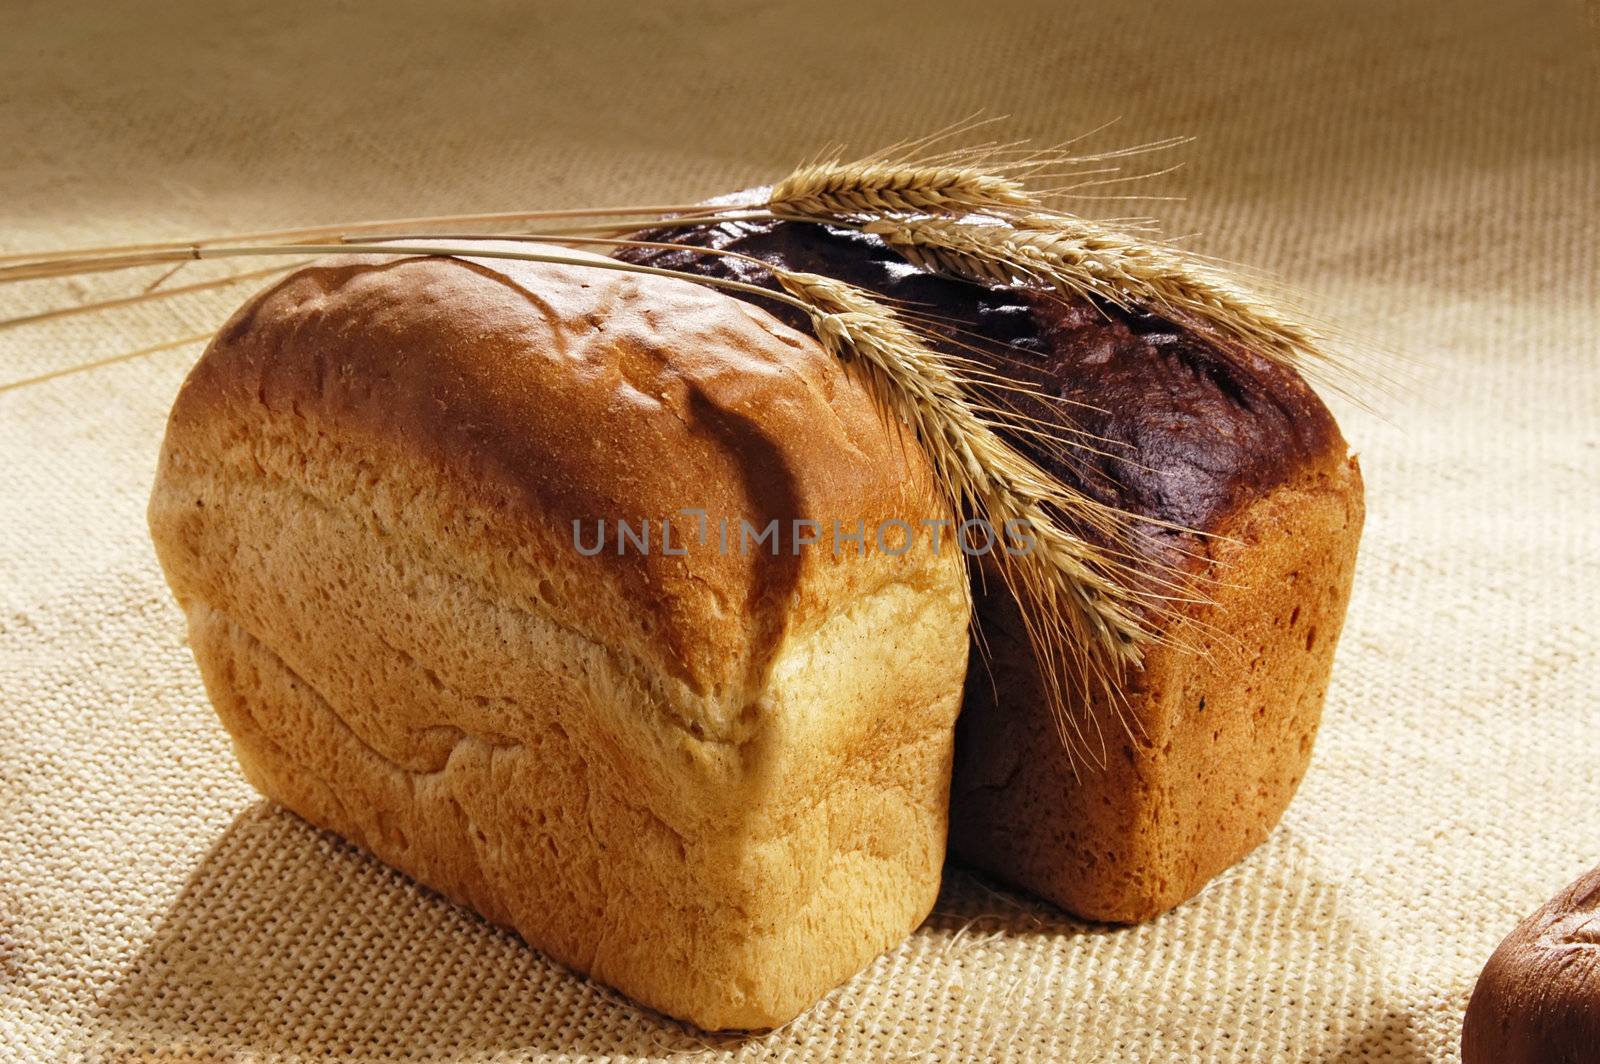 Two loaves of bread with spikelets